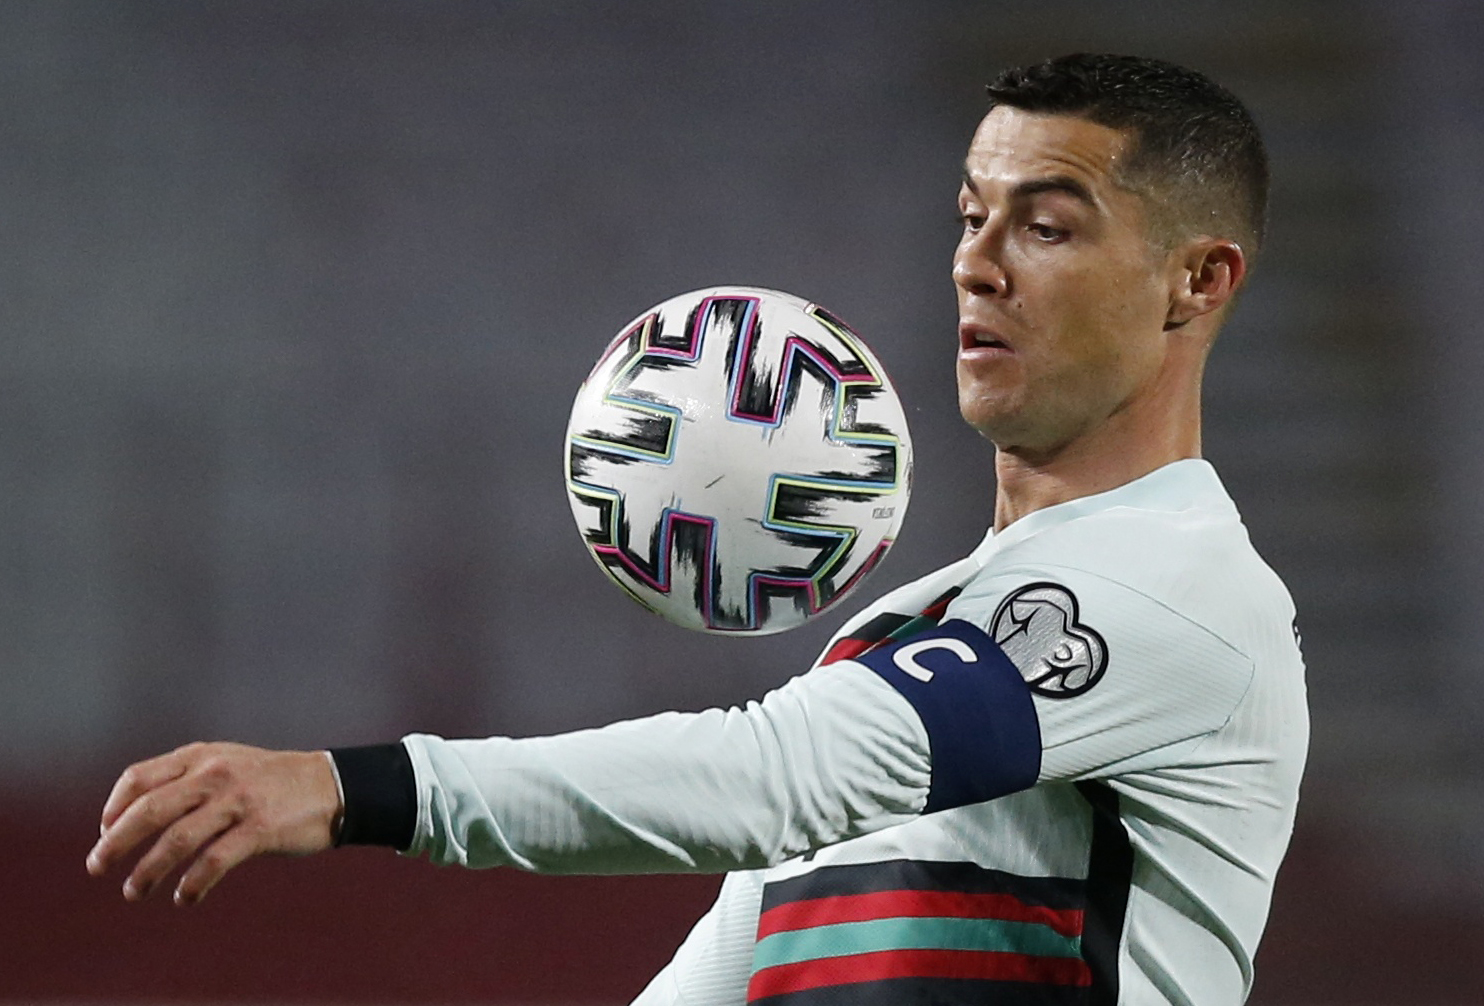 Soccer Football - World Cup Qualifiers Europe - Group A - Serbia v Portugal - Rajko Mitic Stadium, Belgrade, Serbia - March 27, 2021 Portugal's Cristiano Ronaldo in action REUTERS/Novak Djurovic